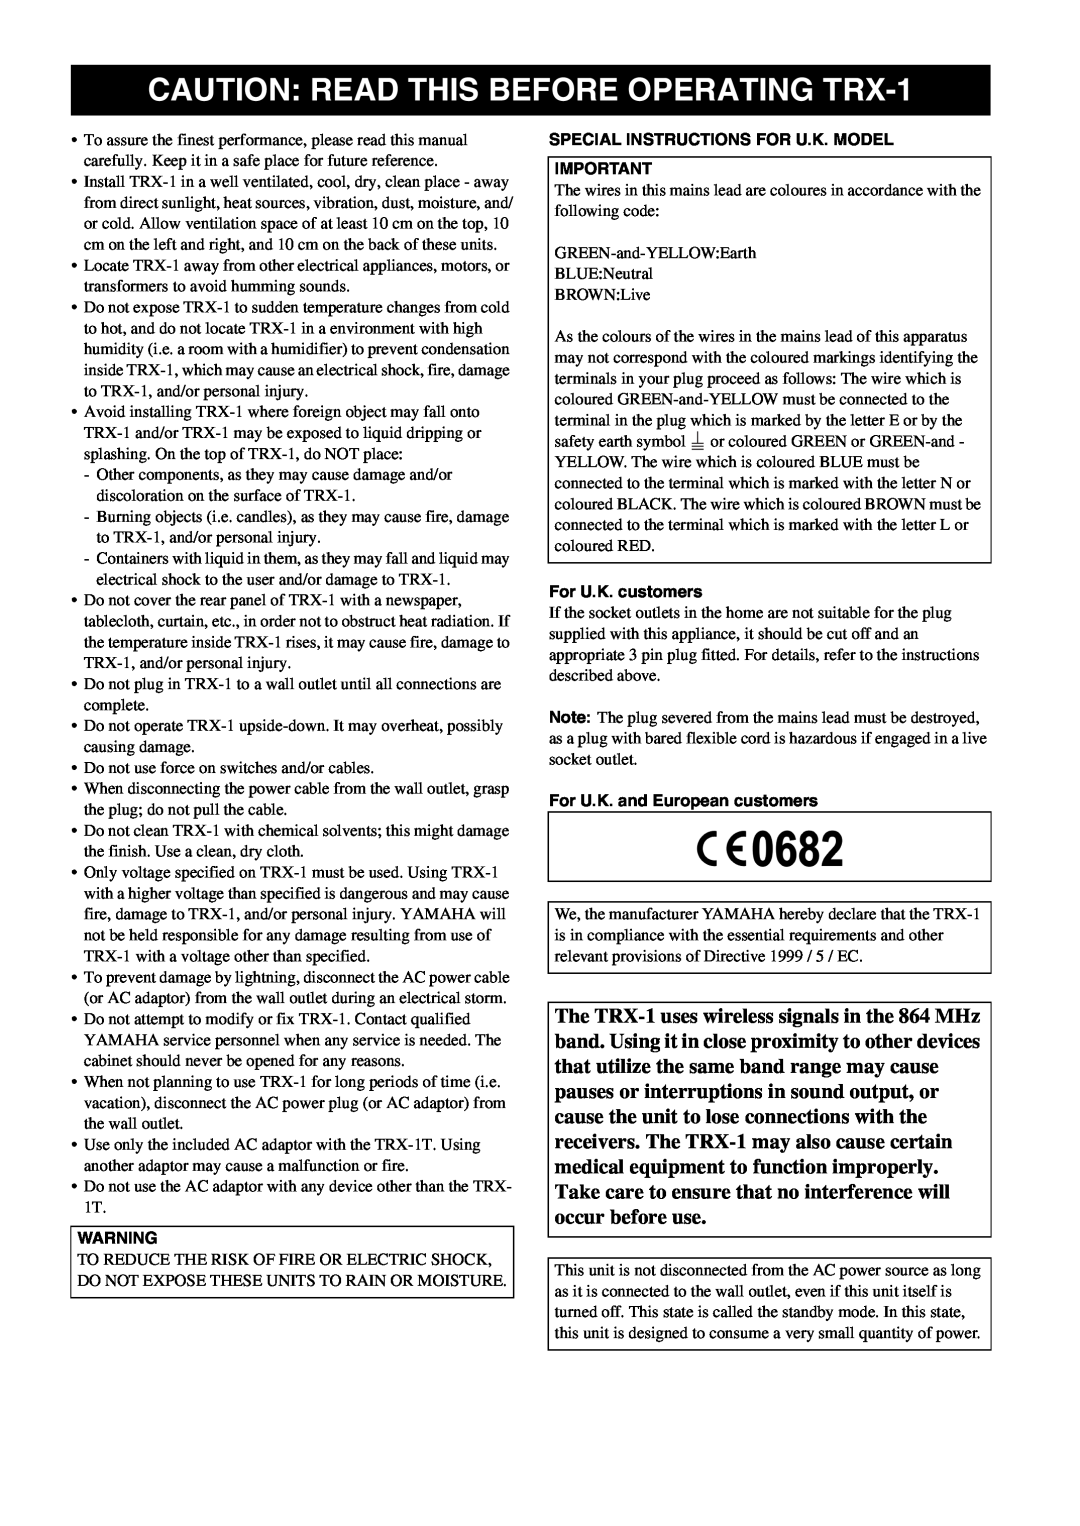 Yamaha TRX-1R, TRX-1T CAUTION READ THIS BEFORE OPERATING TRX-1, Special Instructions For U.K. Model, For U.K. customers 